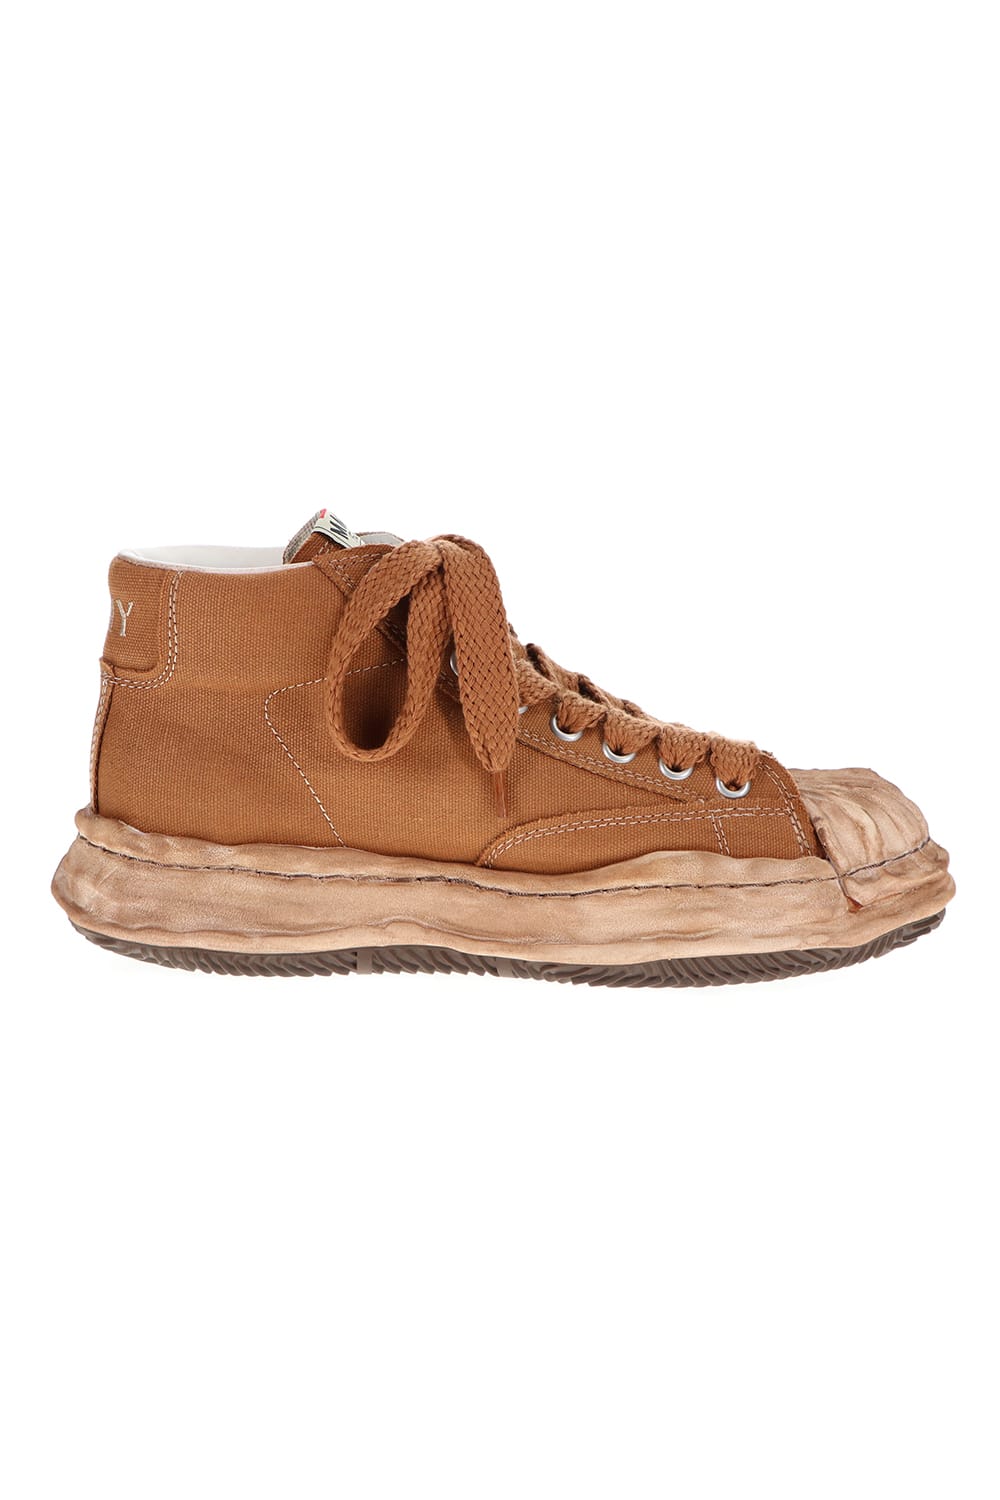 -BLAKEY High- Original STC sole over dyed canvas High-Top sneakers Brown